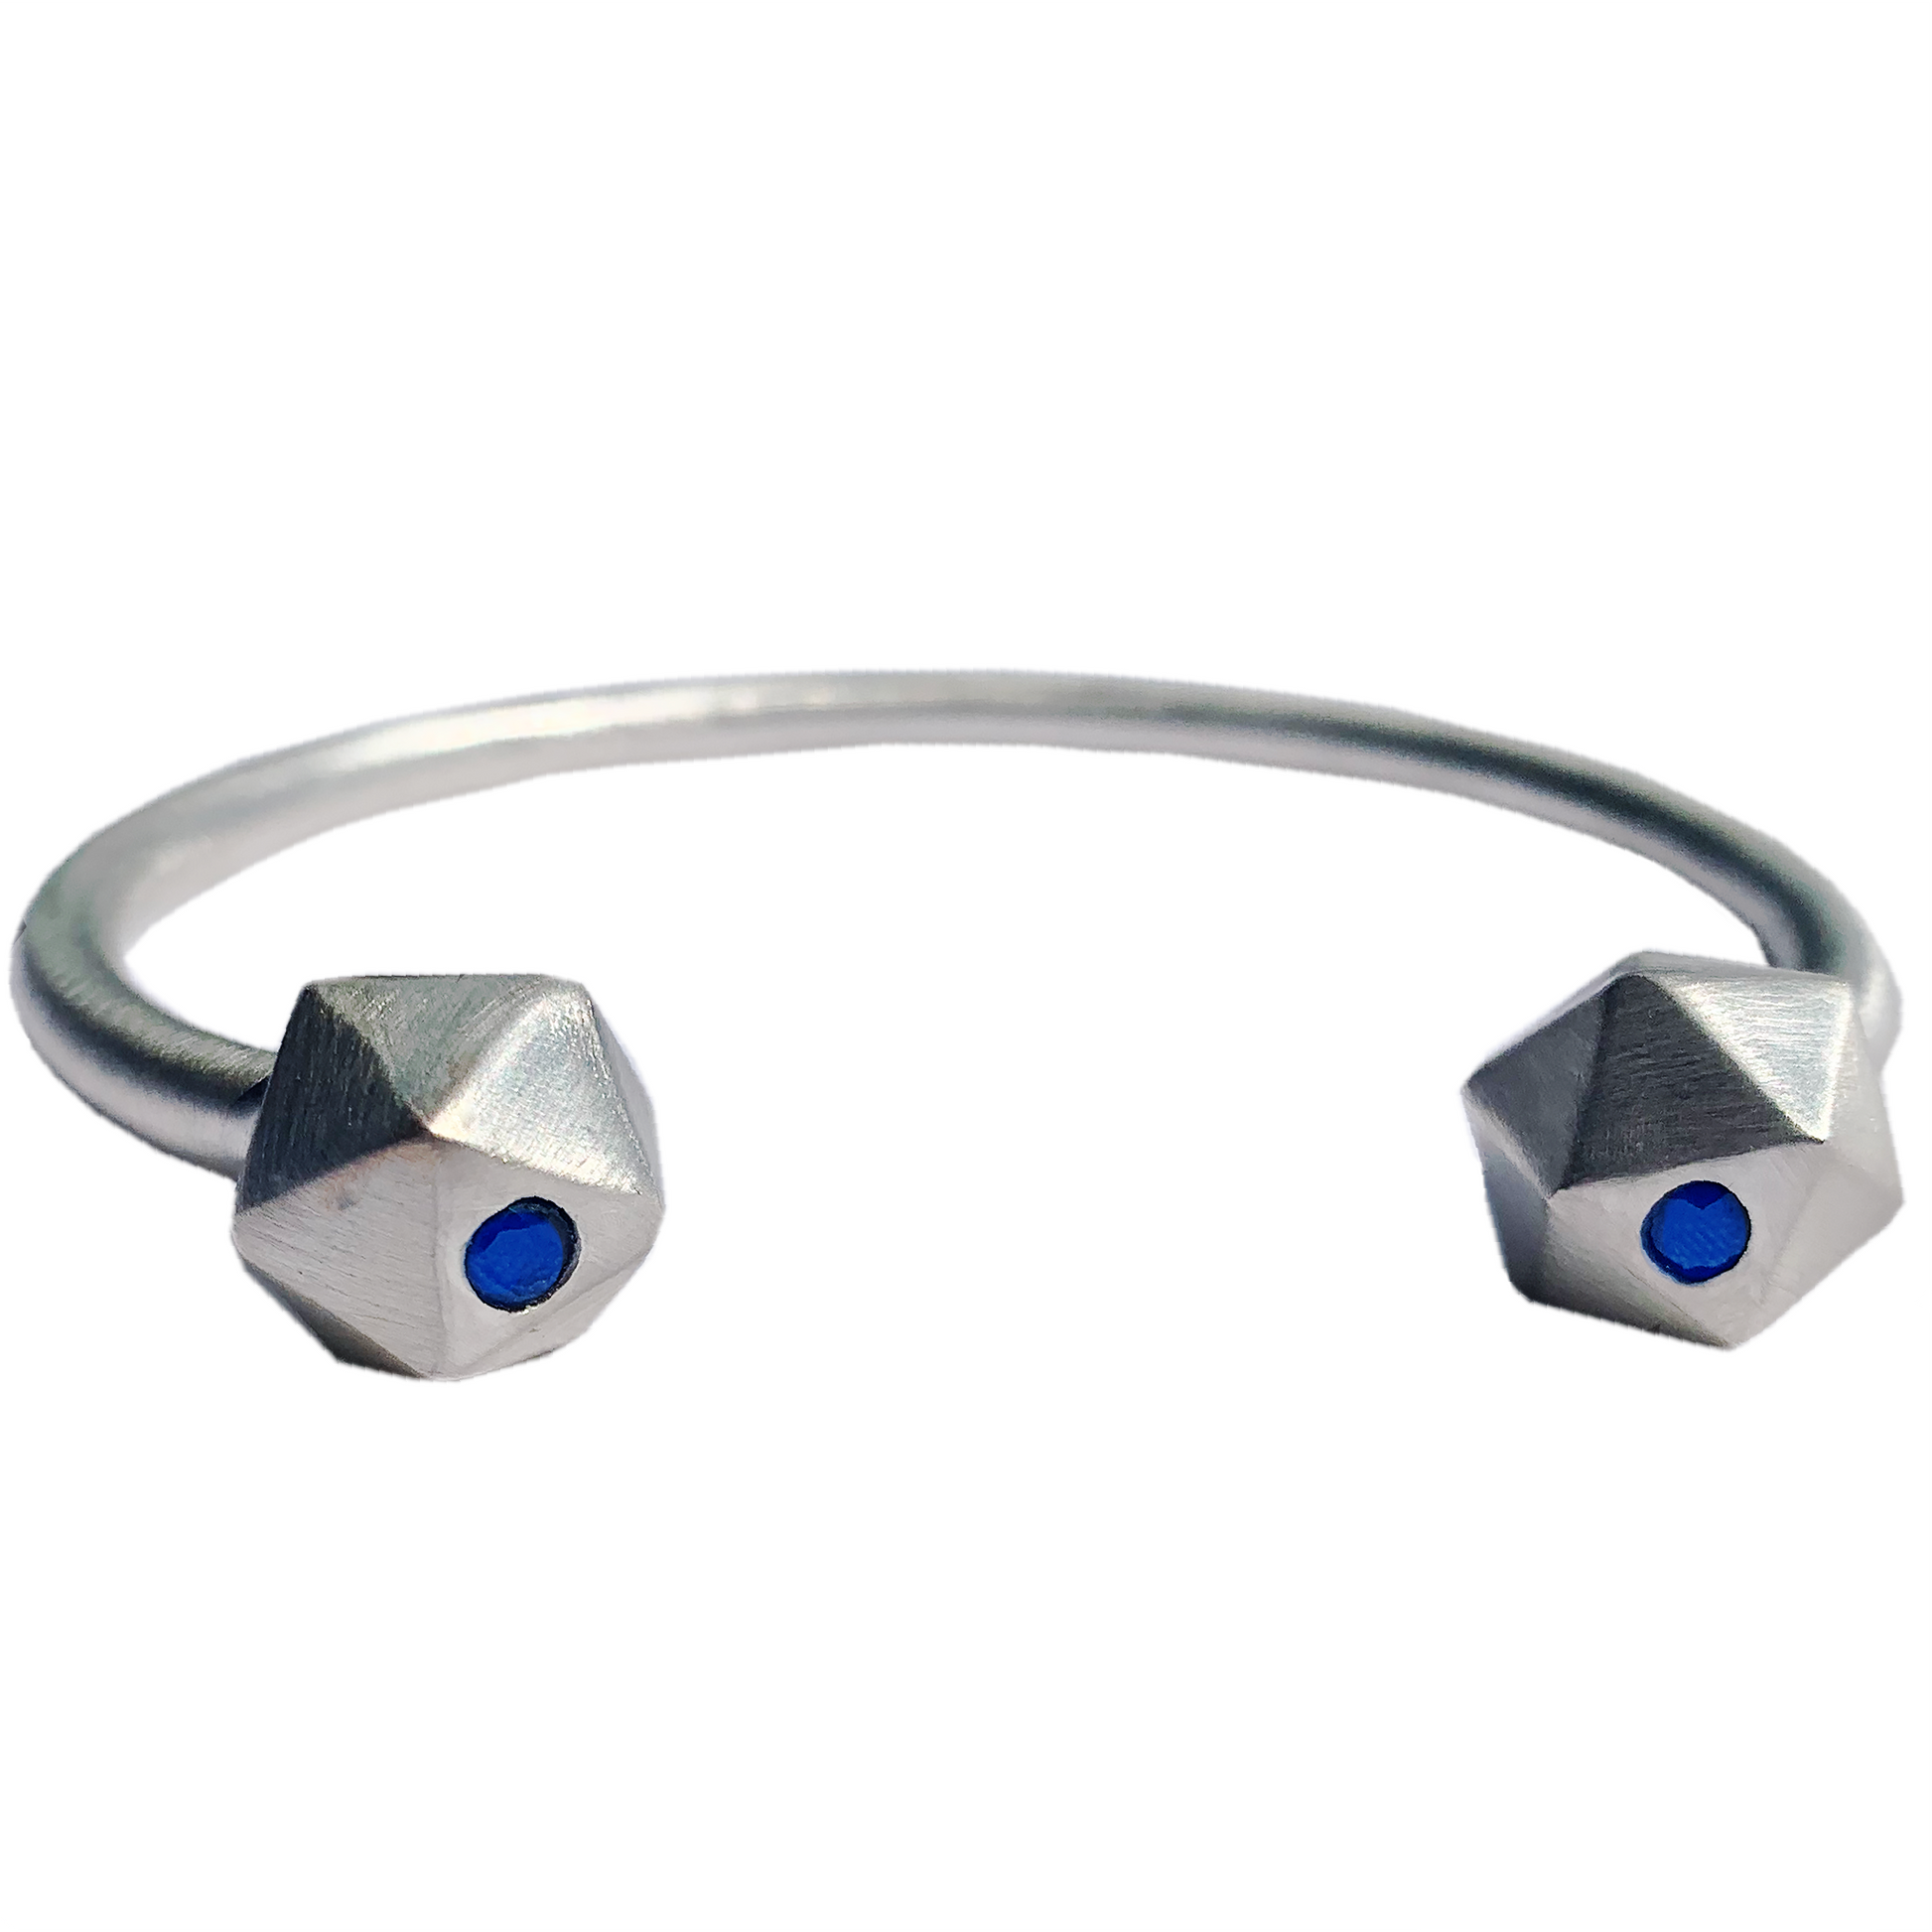 Recycled Silver D20 Dice bangle with sapphire inlay on white background.